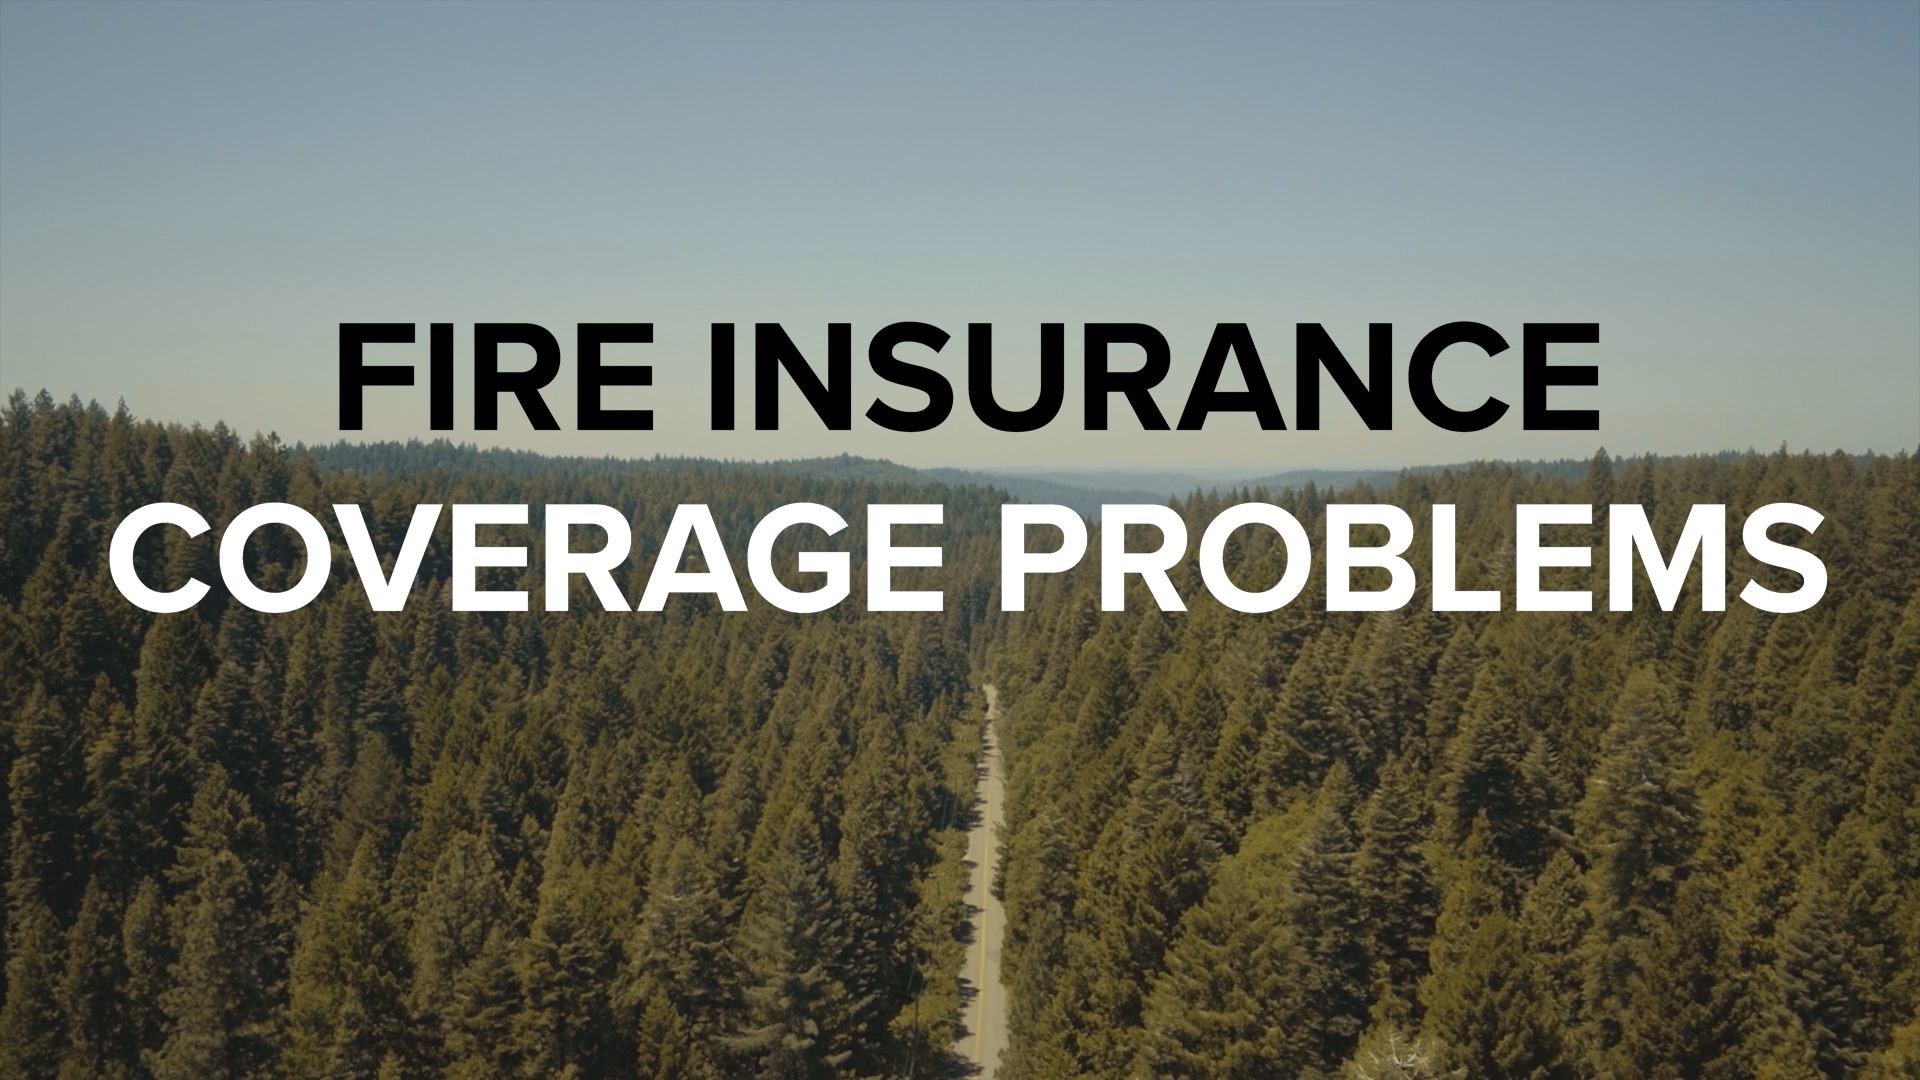 Thousands of people in fire-prone areas are either getting dropped by their homeowners' insurance company or paying sharply raised premiums. This comes after two record years of wildfire damages.